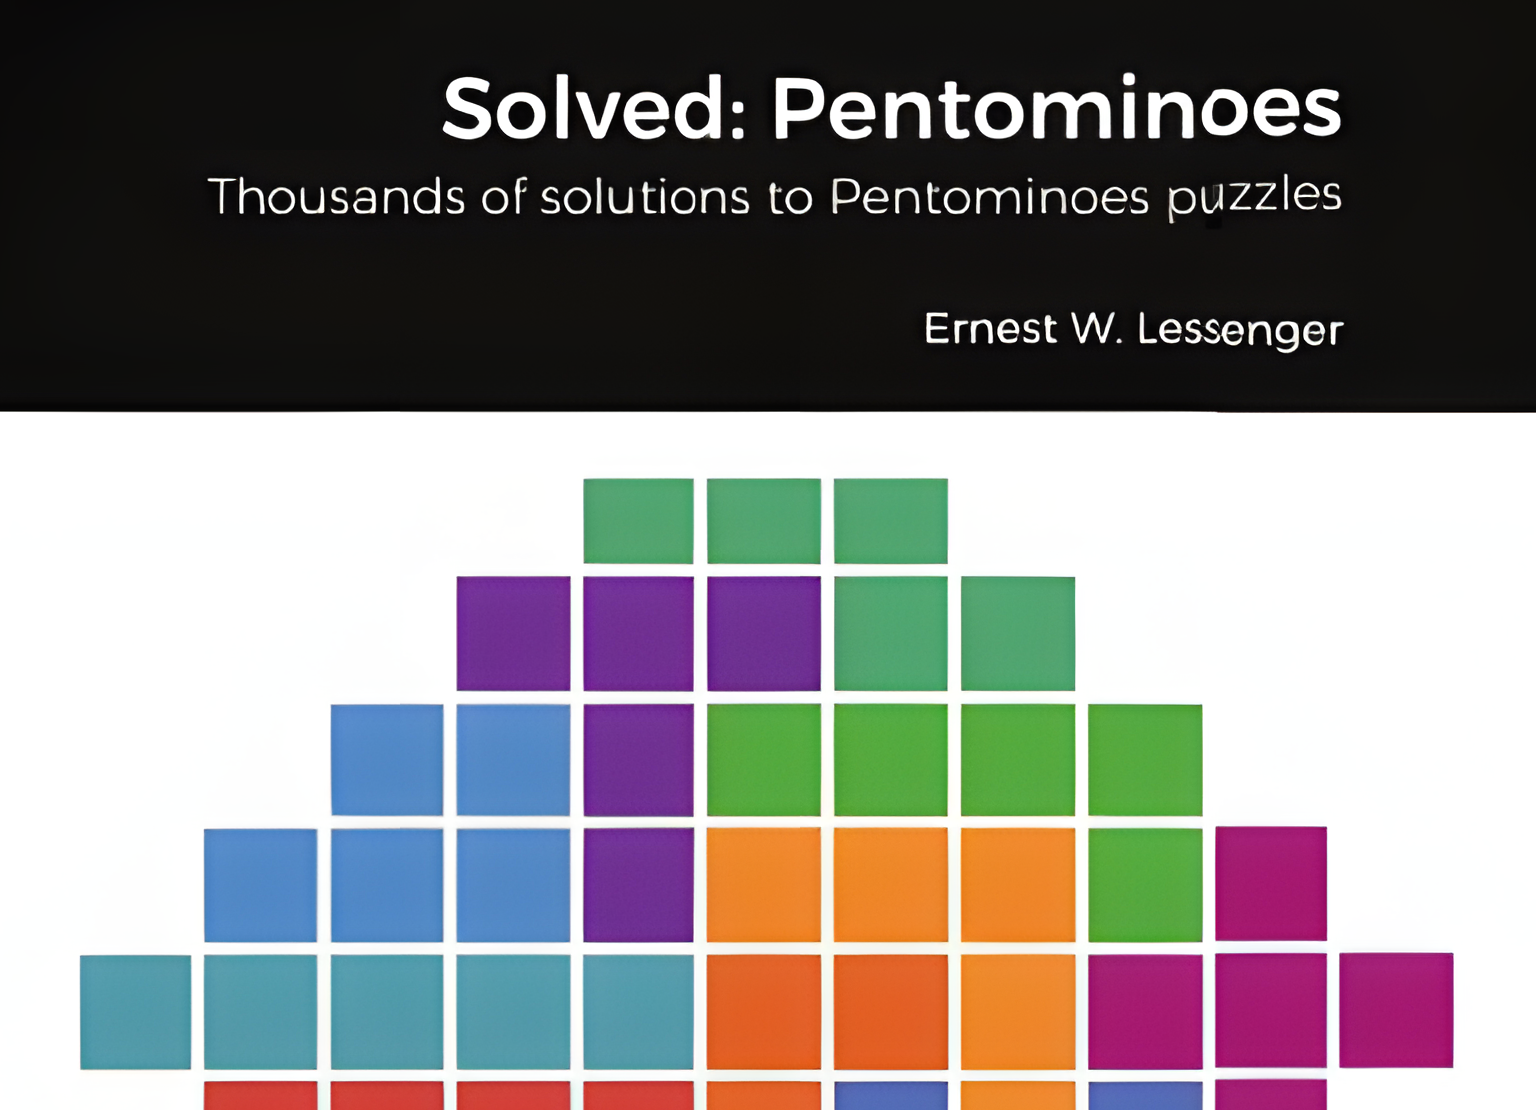 A picture of the book cover: a solved puzzle in the shape of a diamond